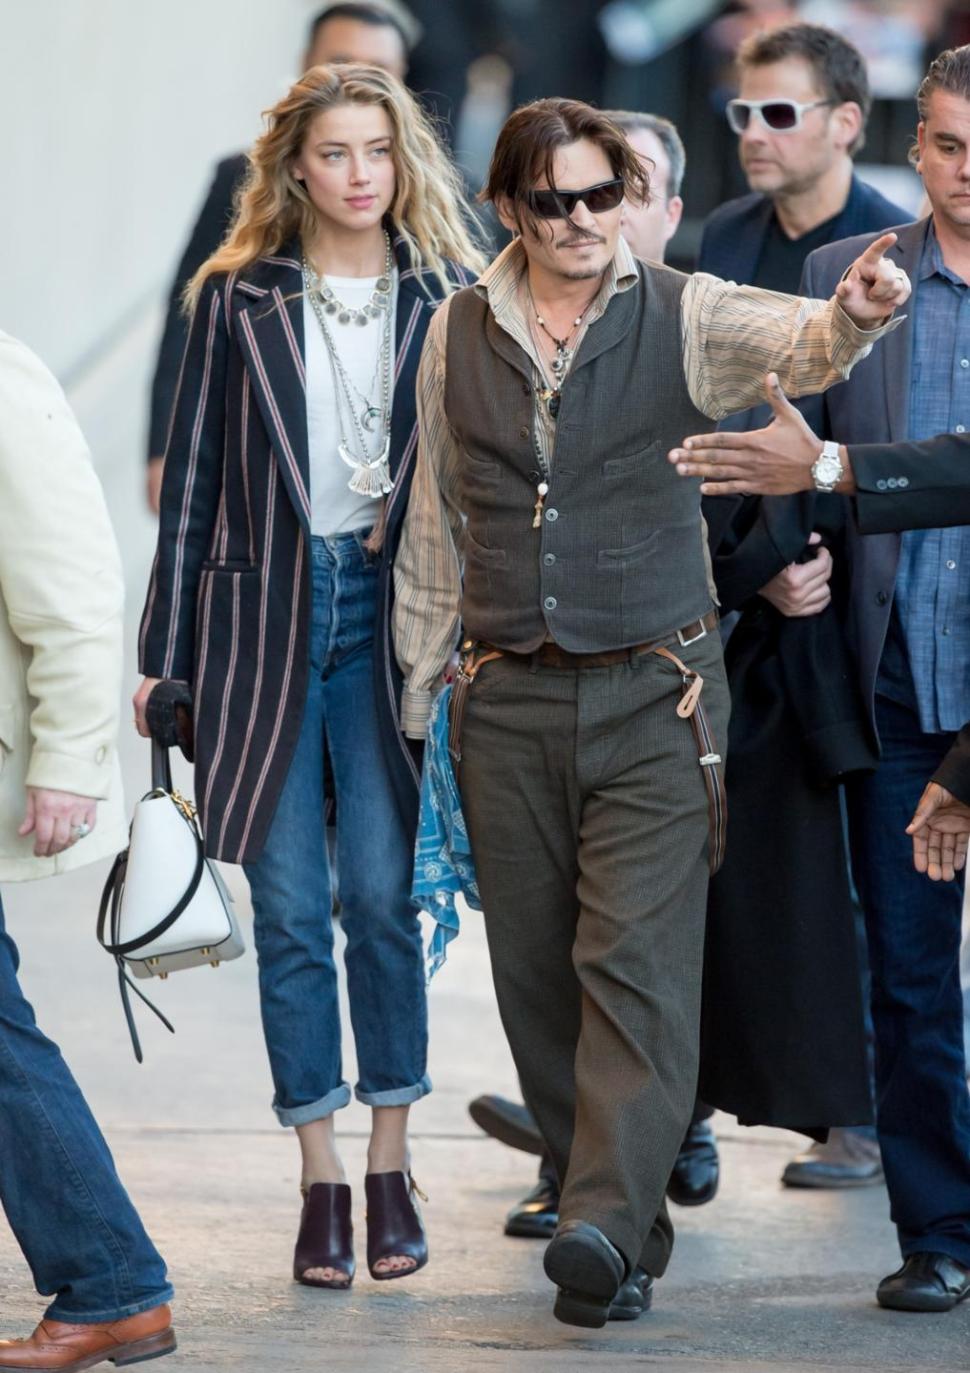 Amber Heard and Johnny Depp on way to film "Jimmy Kimmel Live." 